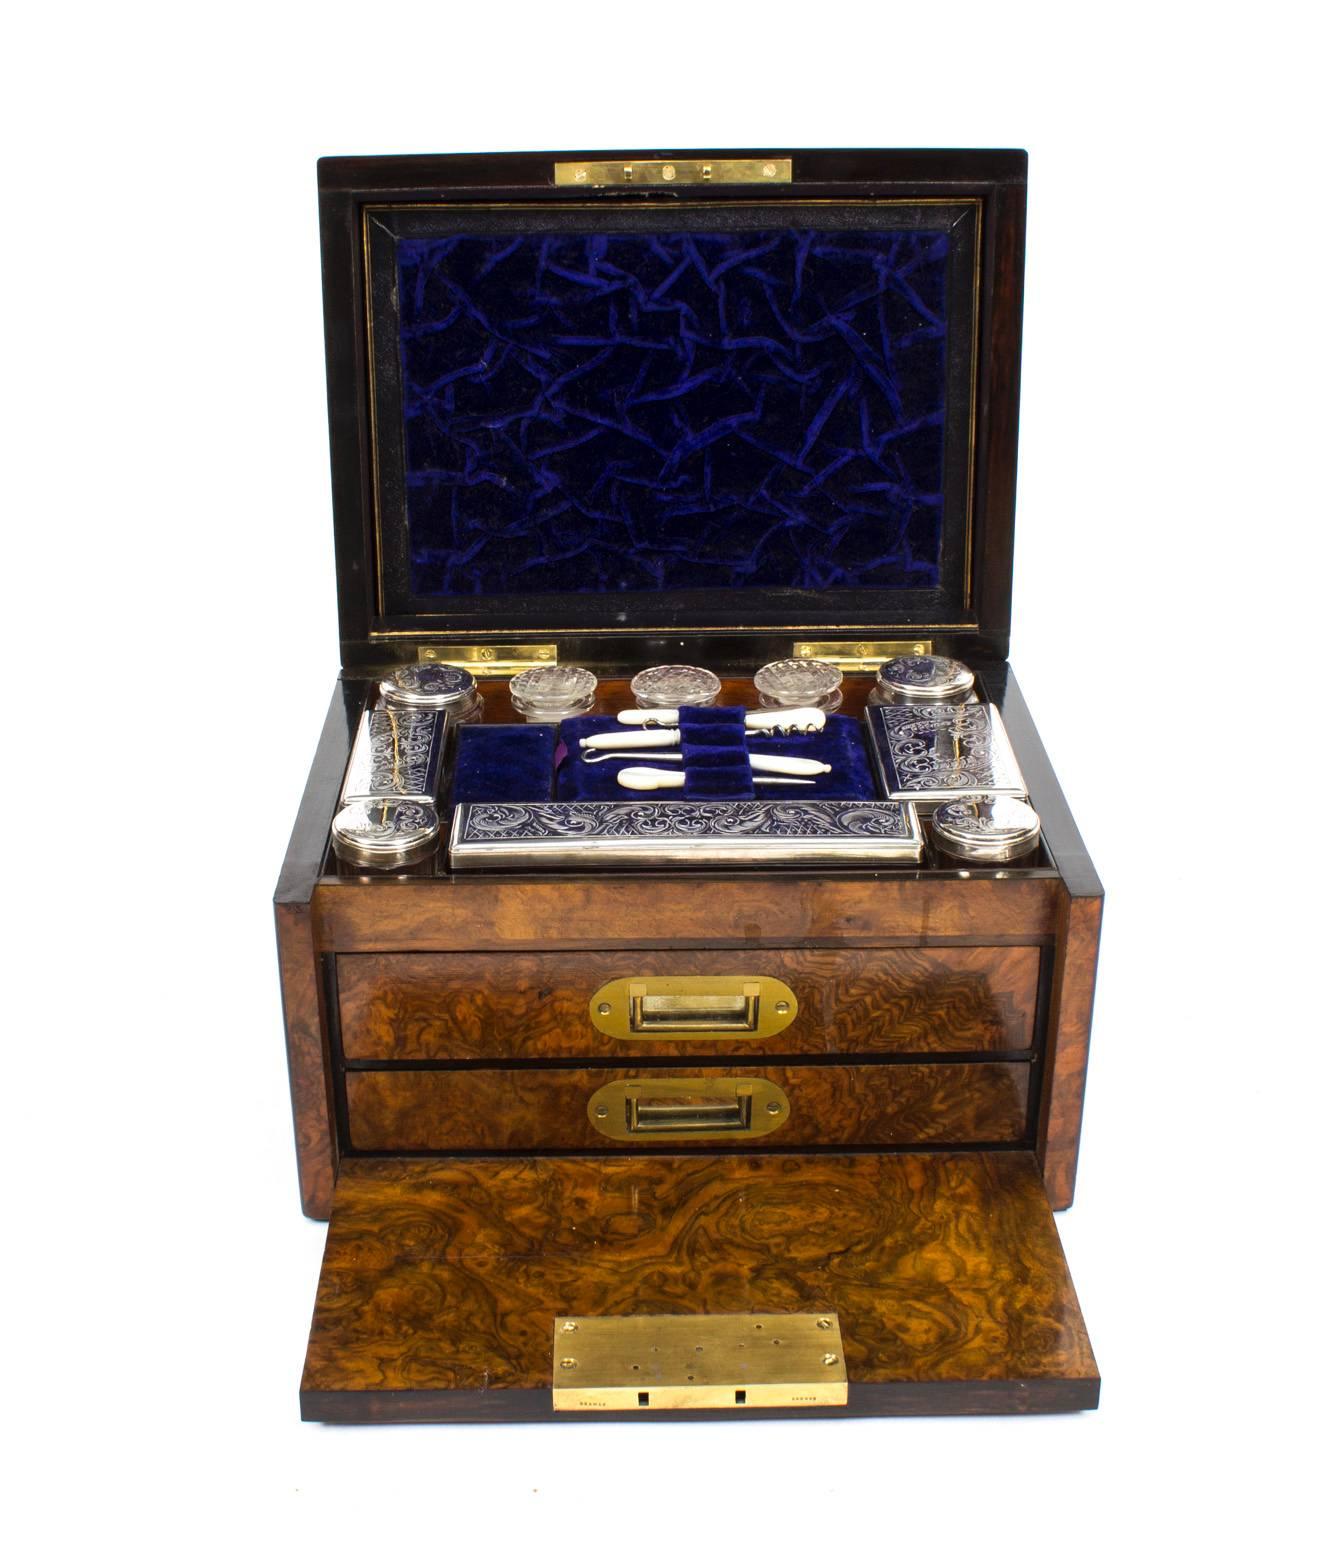 A very attractive antique Victorian English burr walnut travelling dressing set, the hinged cover with an elegant brass shield cartouche, circa 1870 in date.
The casket is made of stunning burr walnut and is in fantastic condition. It contains